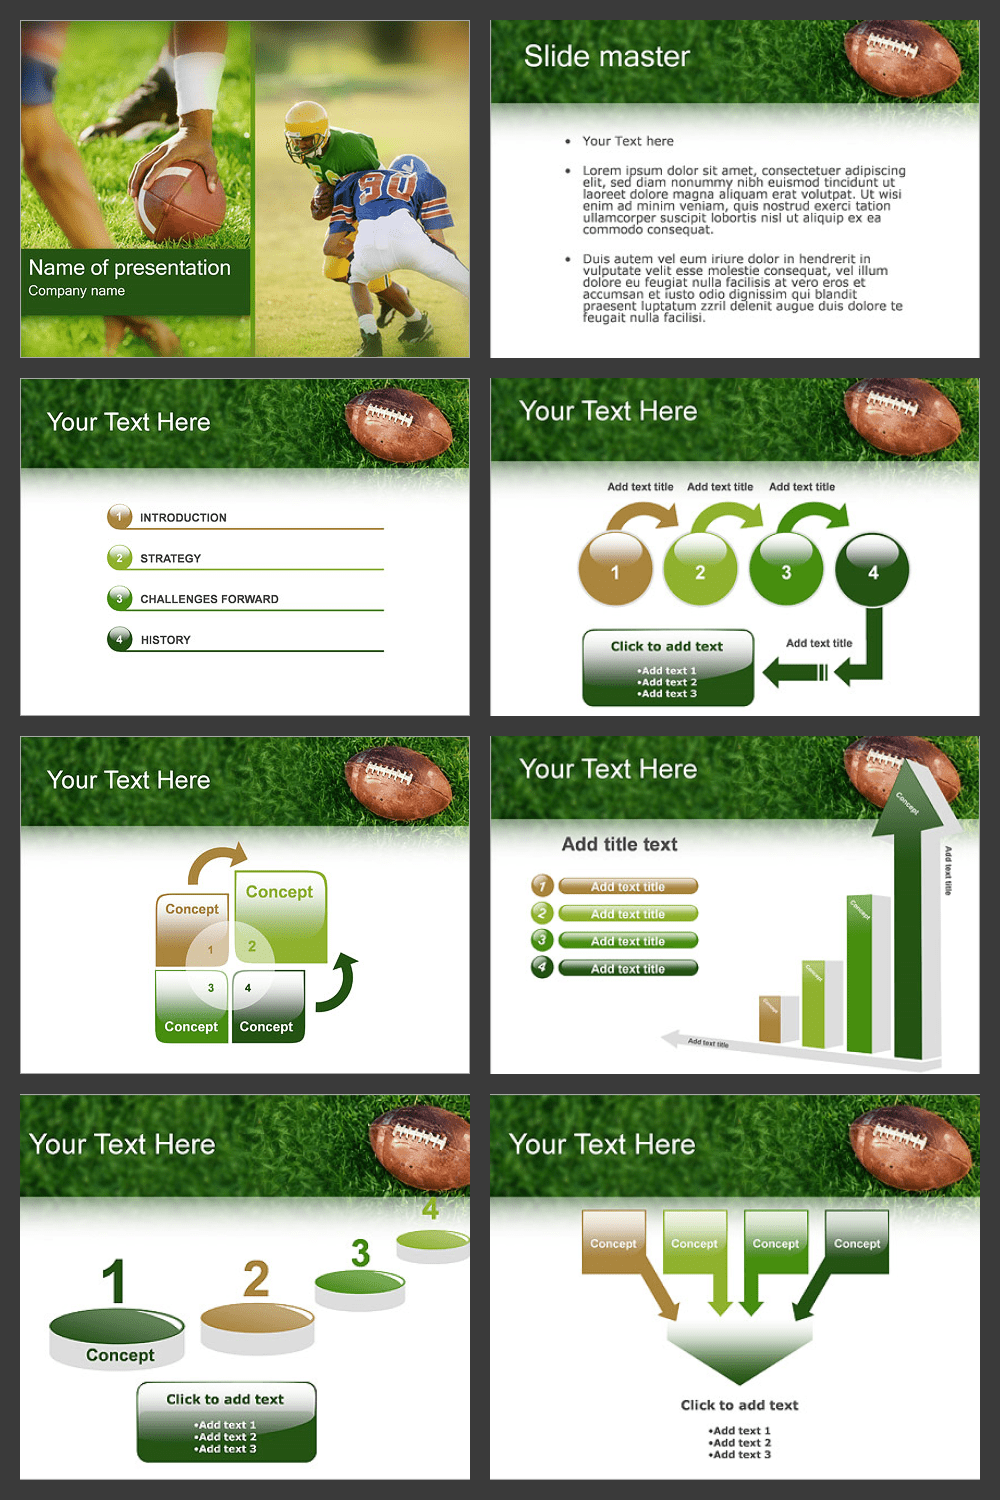 American football powerpoint template.